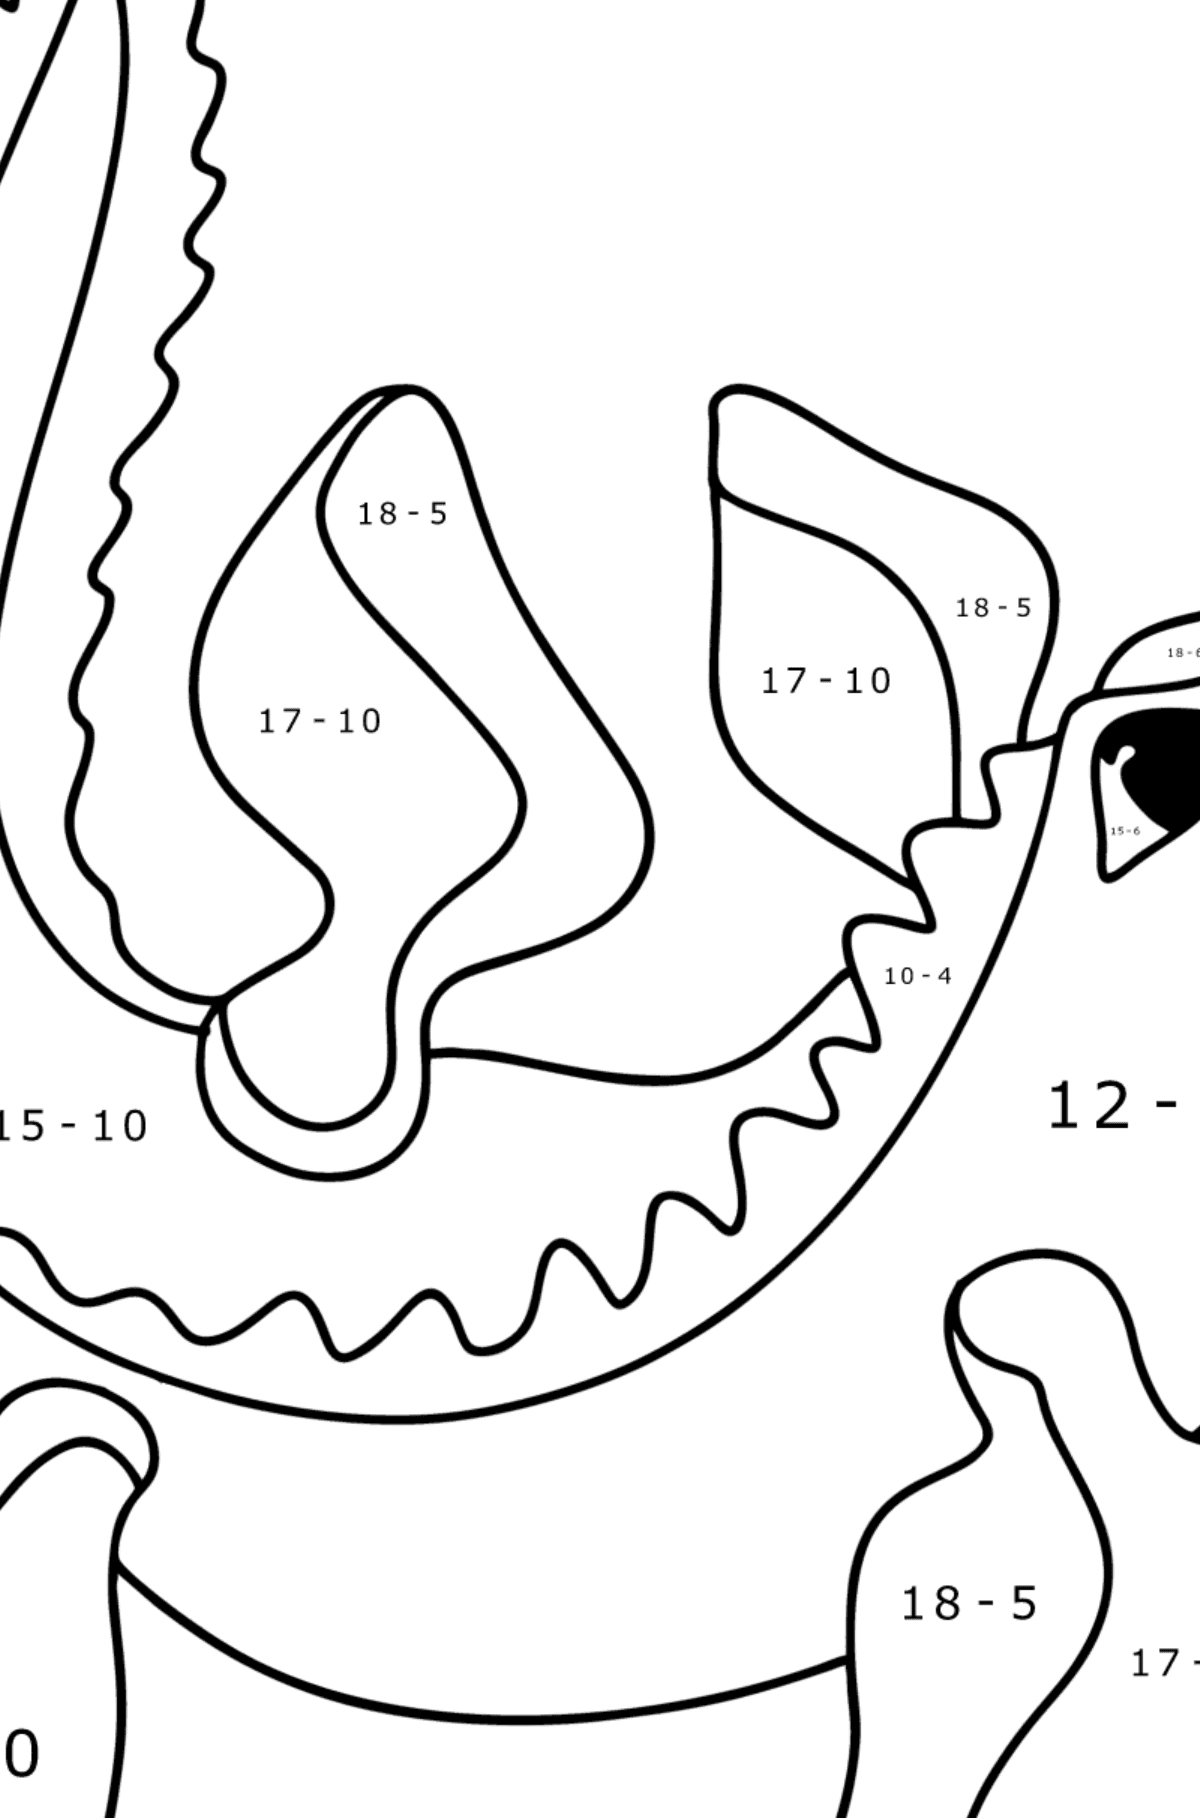 Mosasaurus coloring page - Math Coloring - Subtraction for Kids